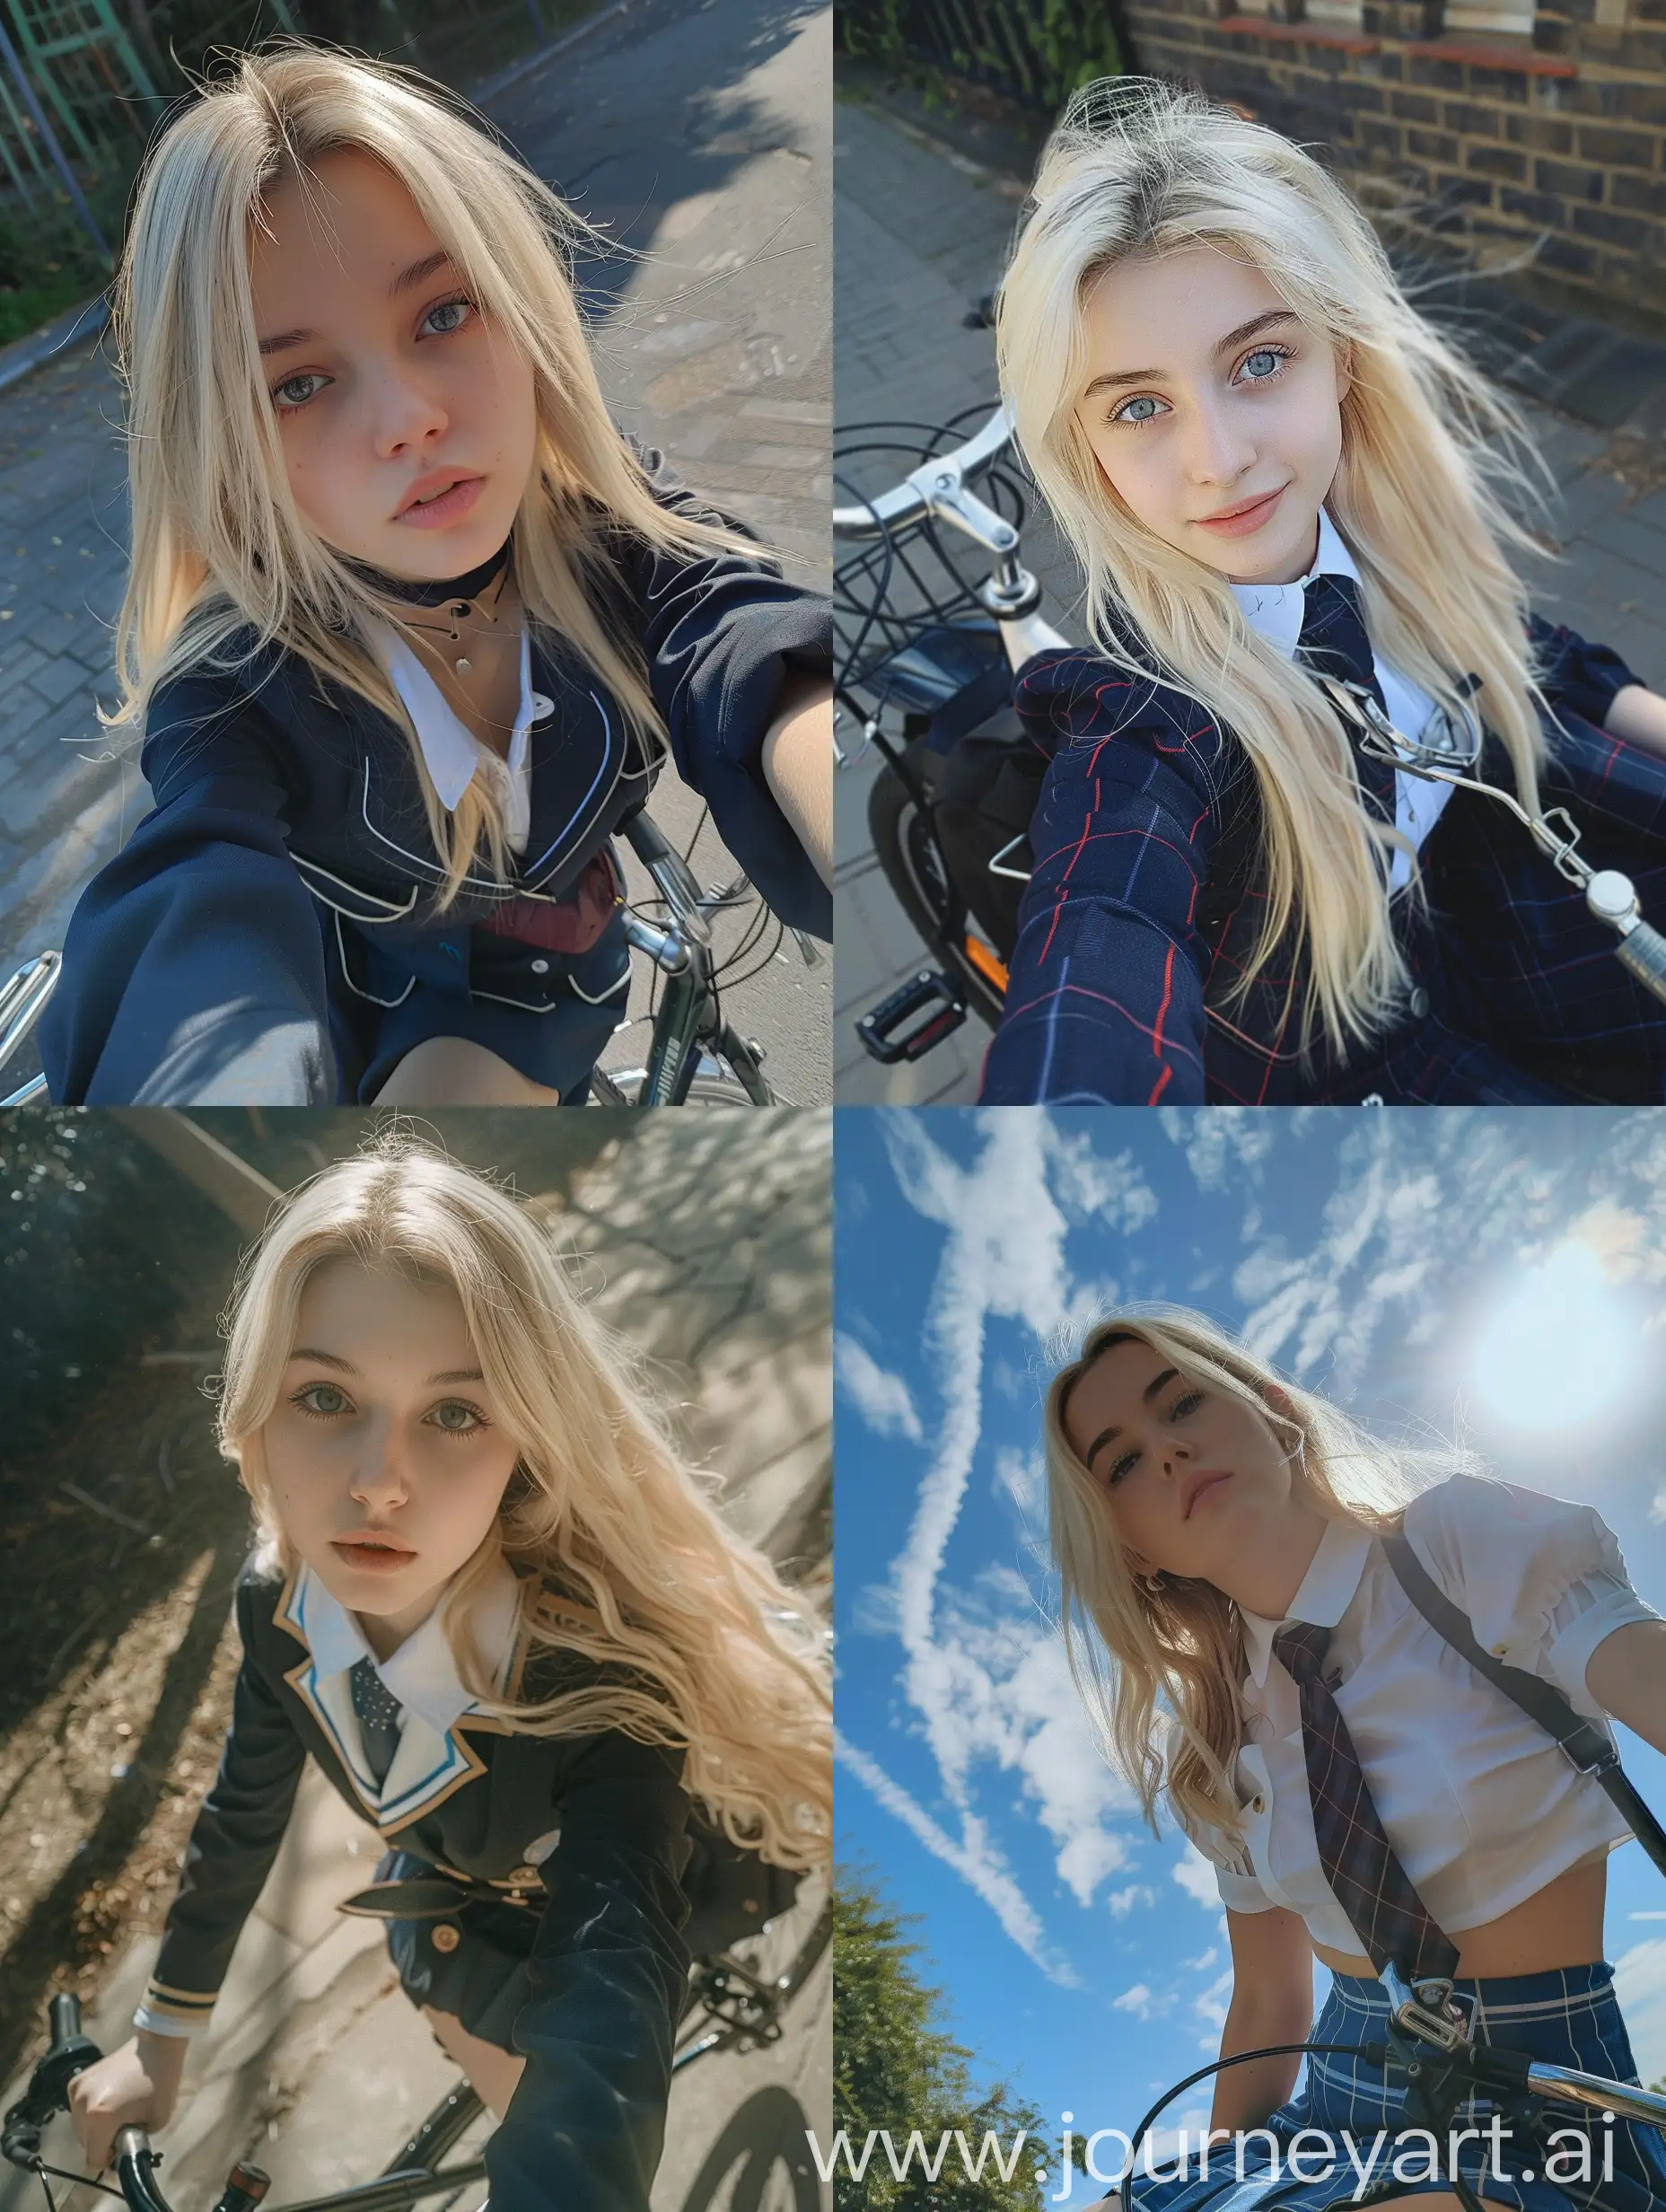 Young-Woman-in-School-Uniform-Taking-Selfie-on-Bicycle